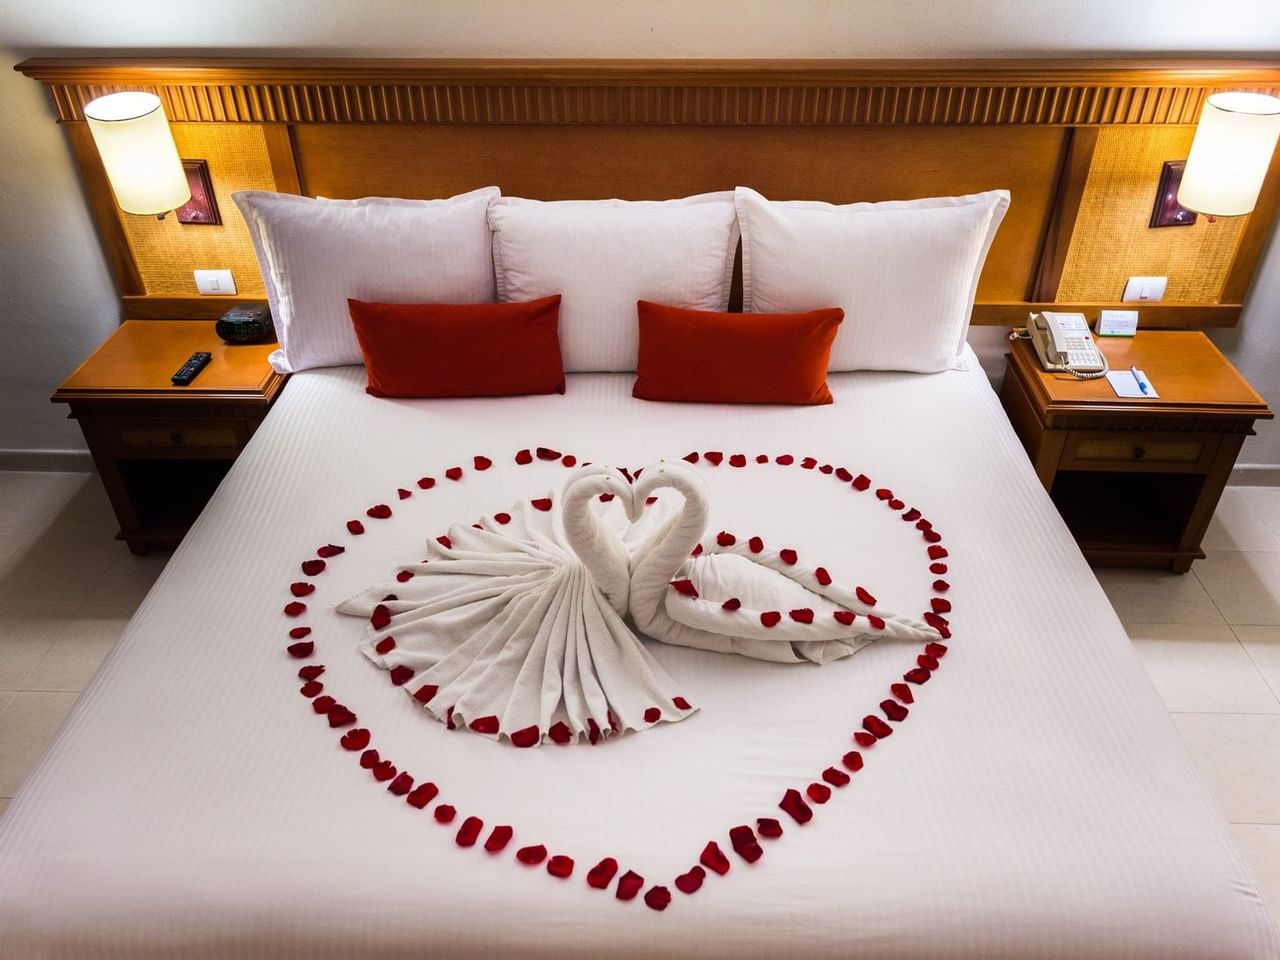 Bed with rose petals in Premium Room at The Reef Coco Beach